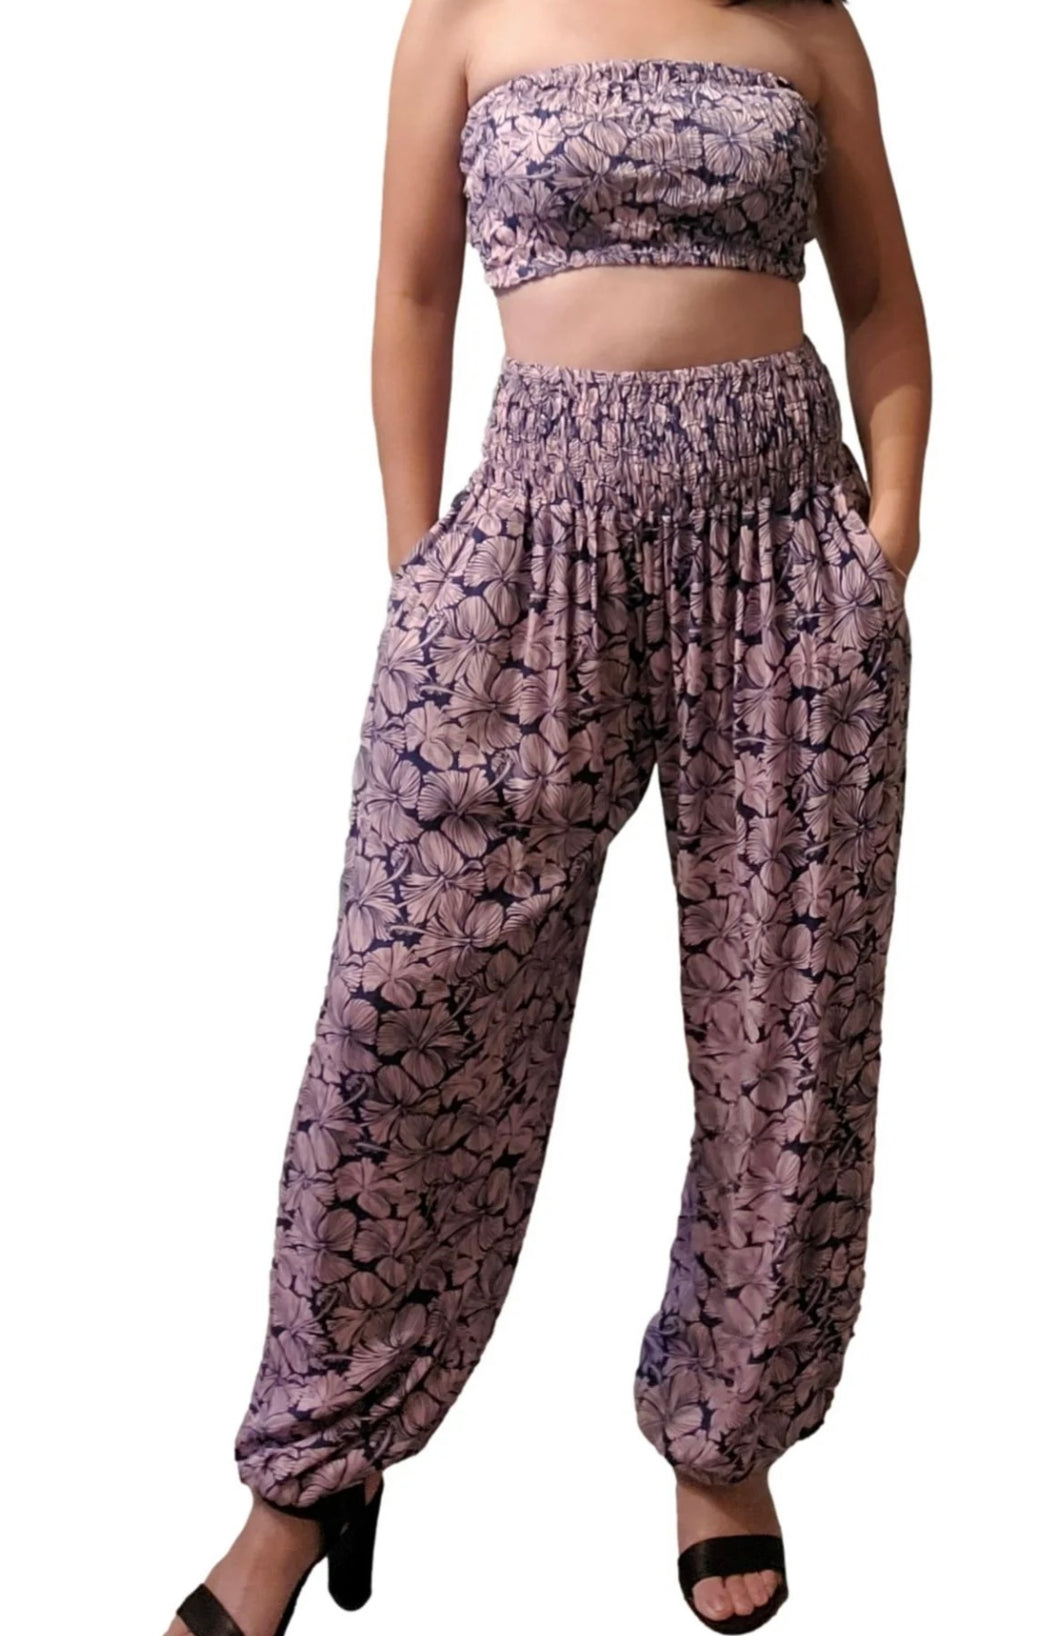 Hibiscus Pants with Bandeau Top (One size)